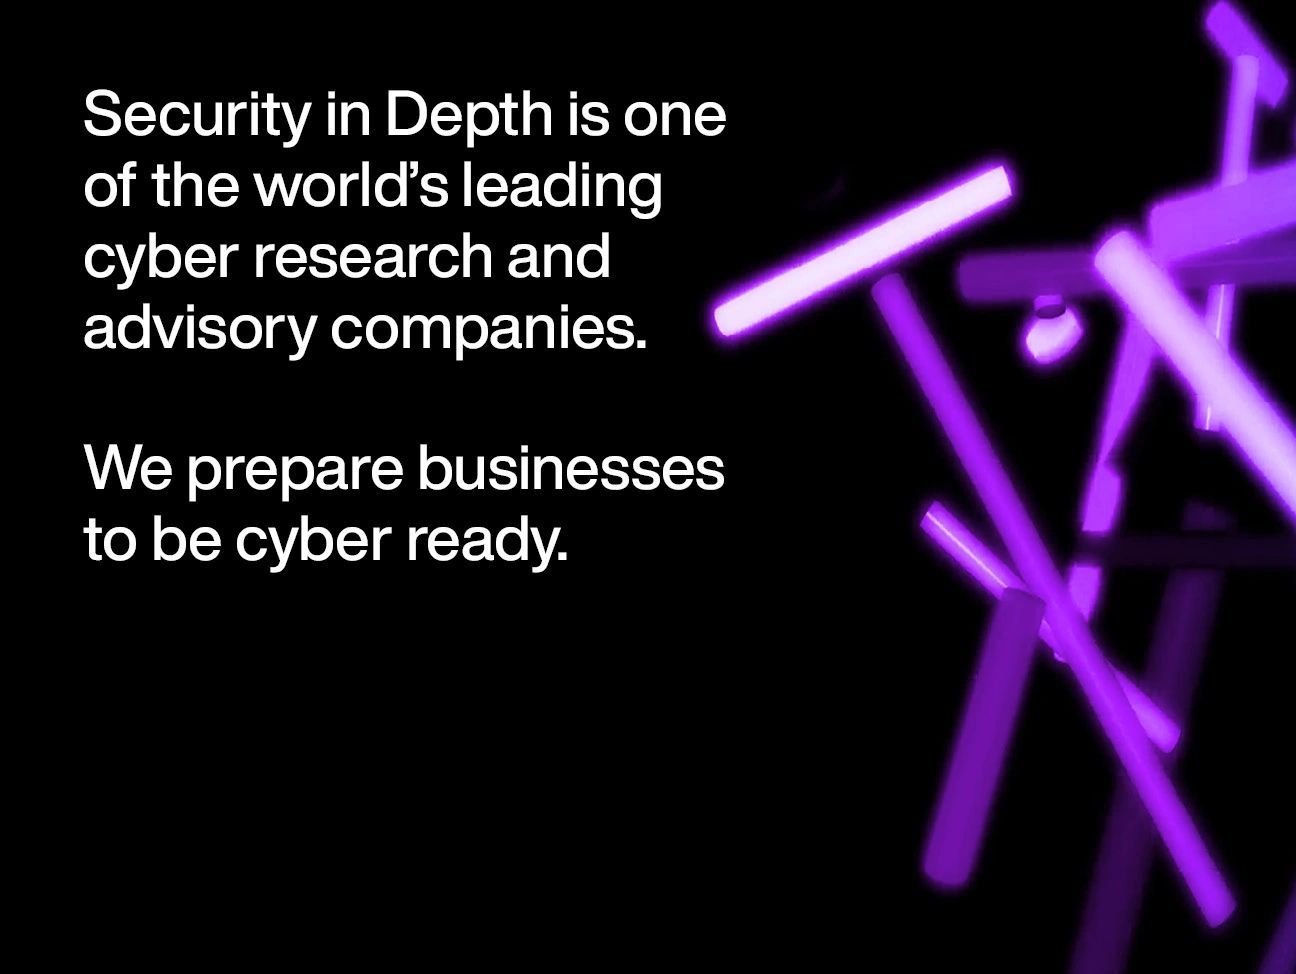 Security in Depth is a Cyber Security research organisation.